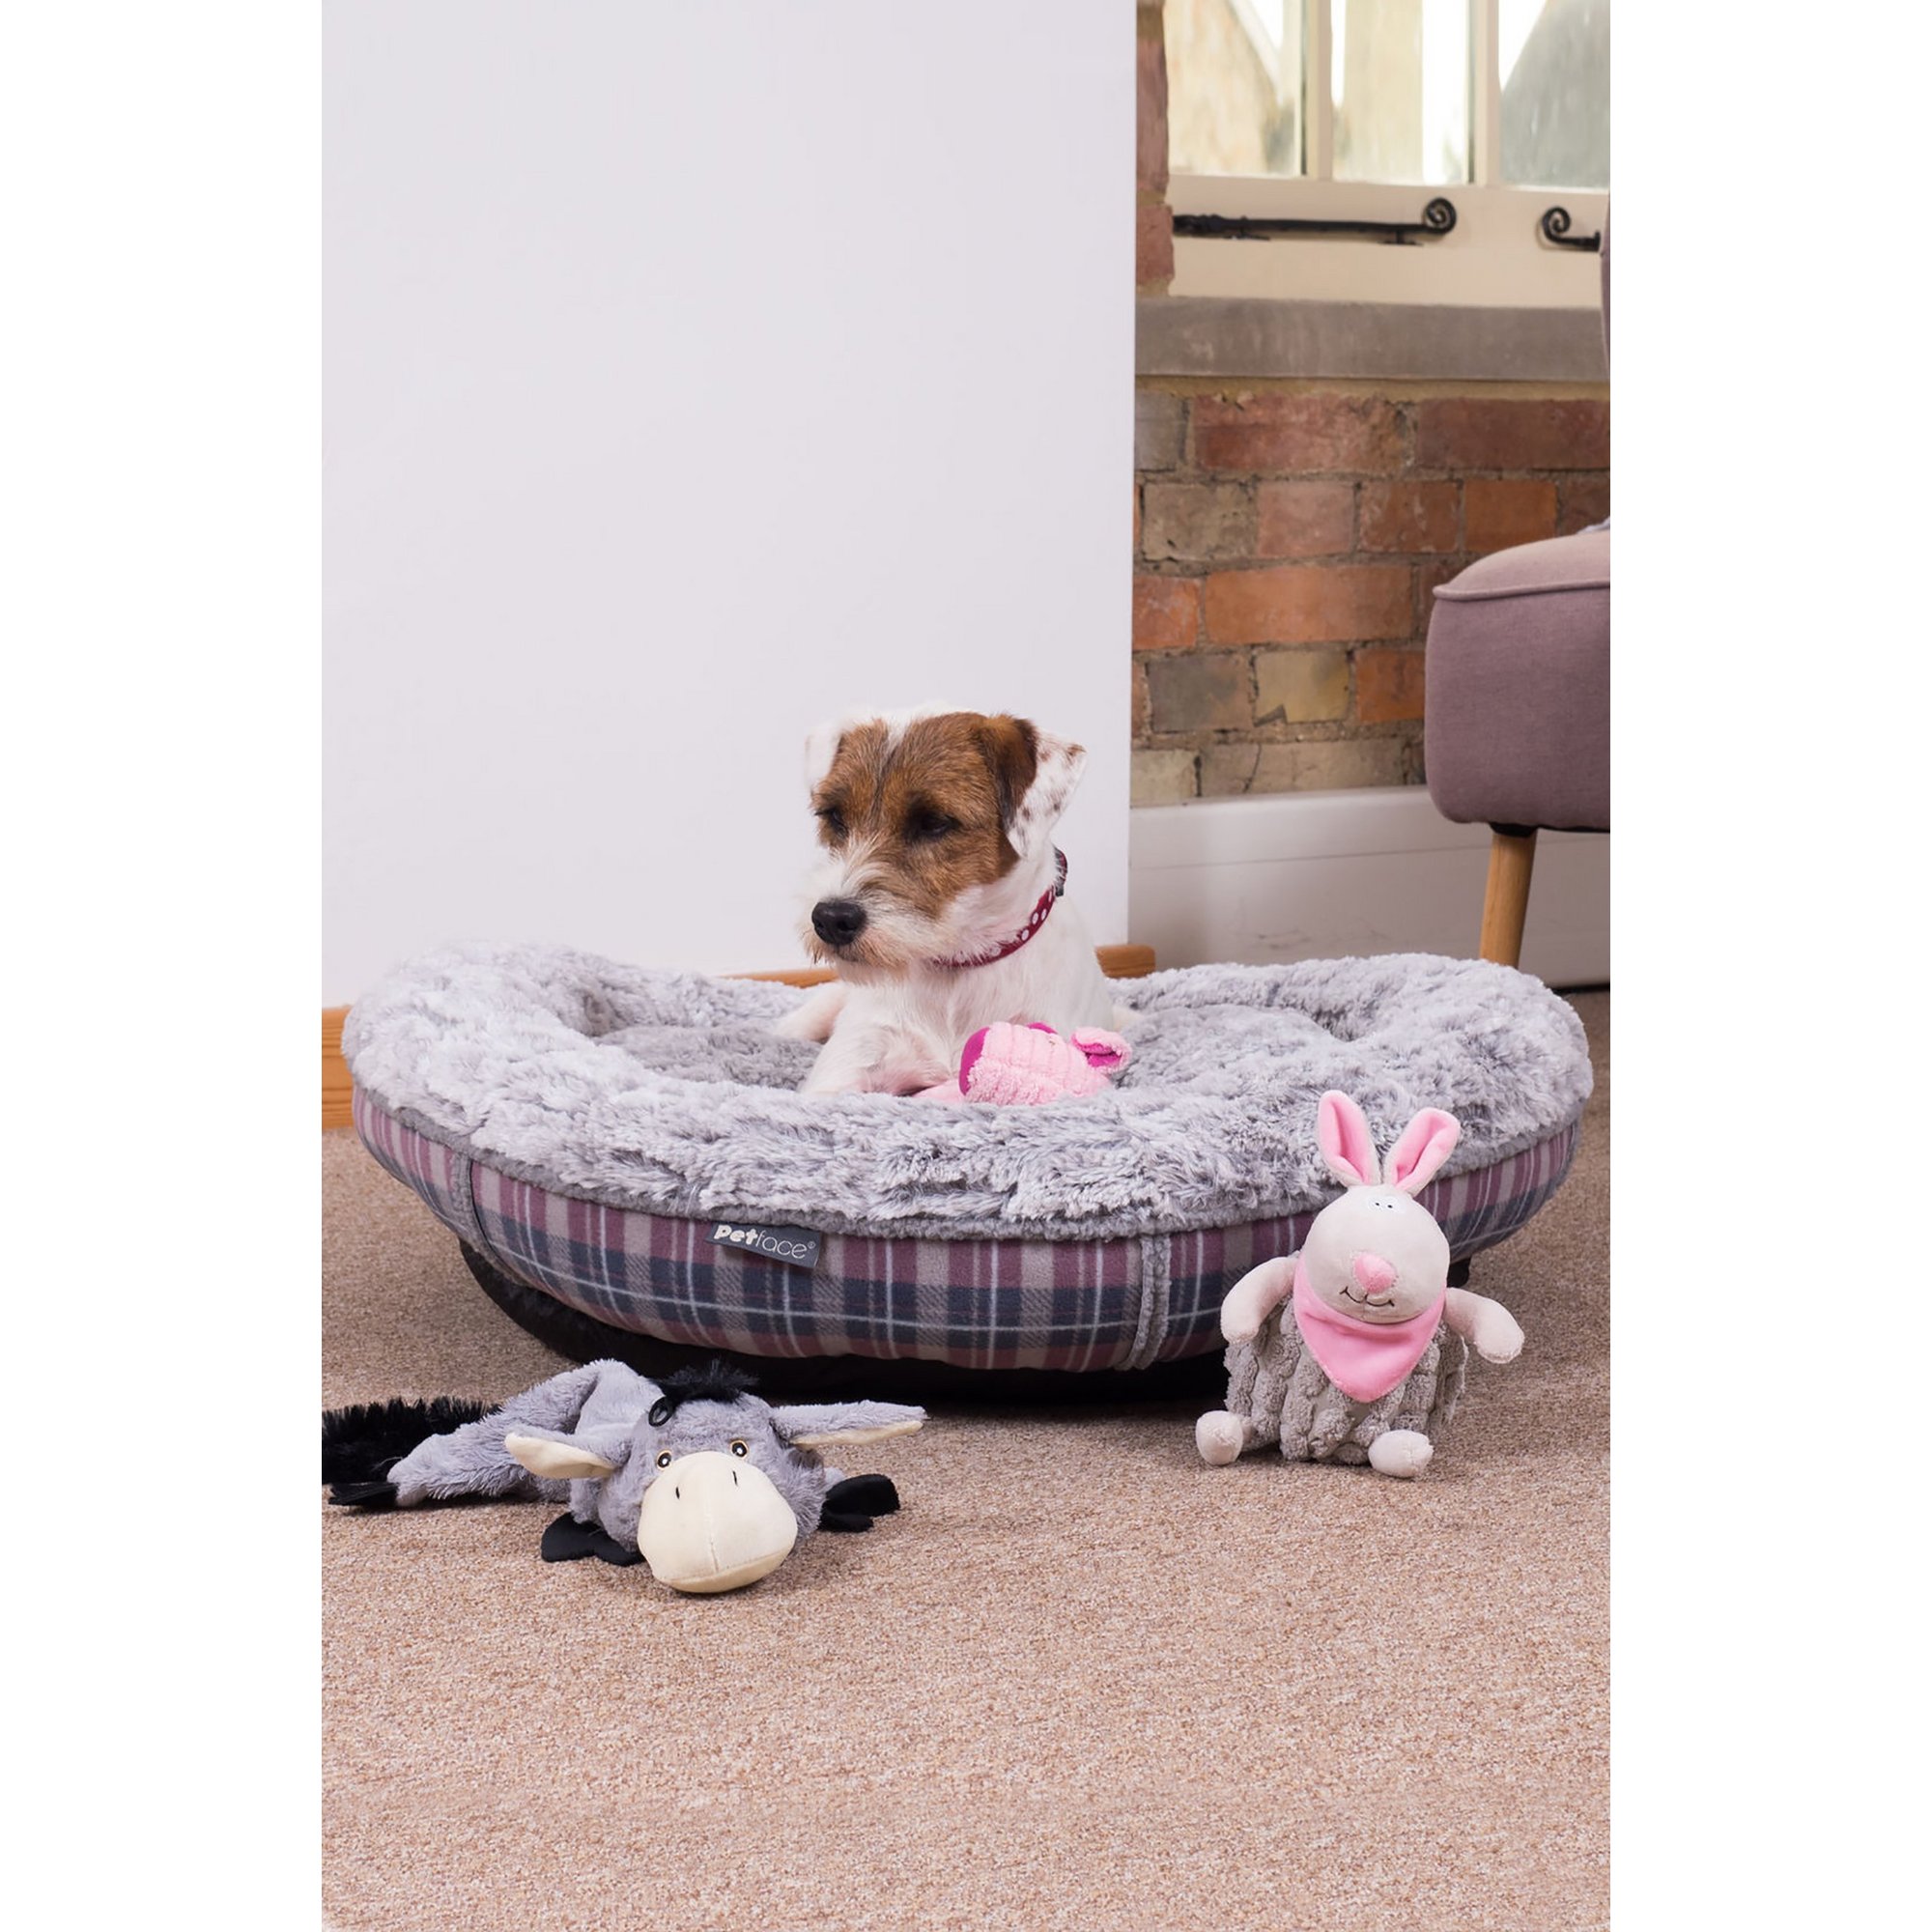 Petface Dove Grey Check Donut Bed